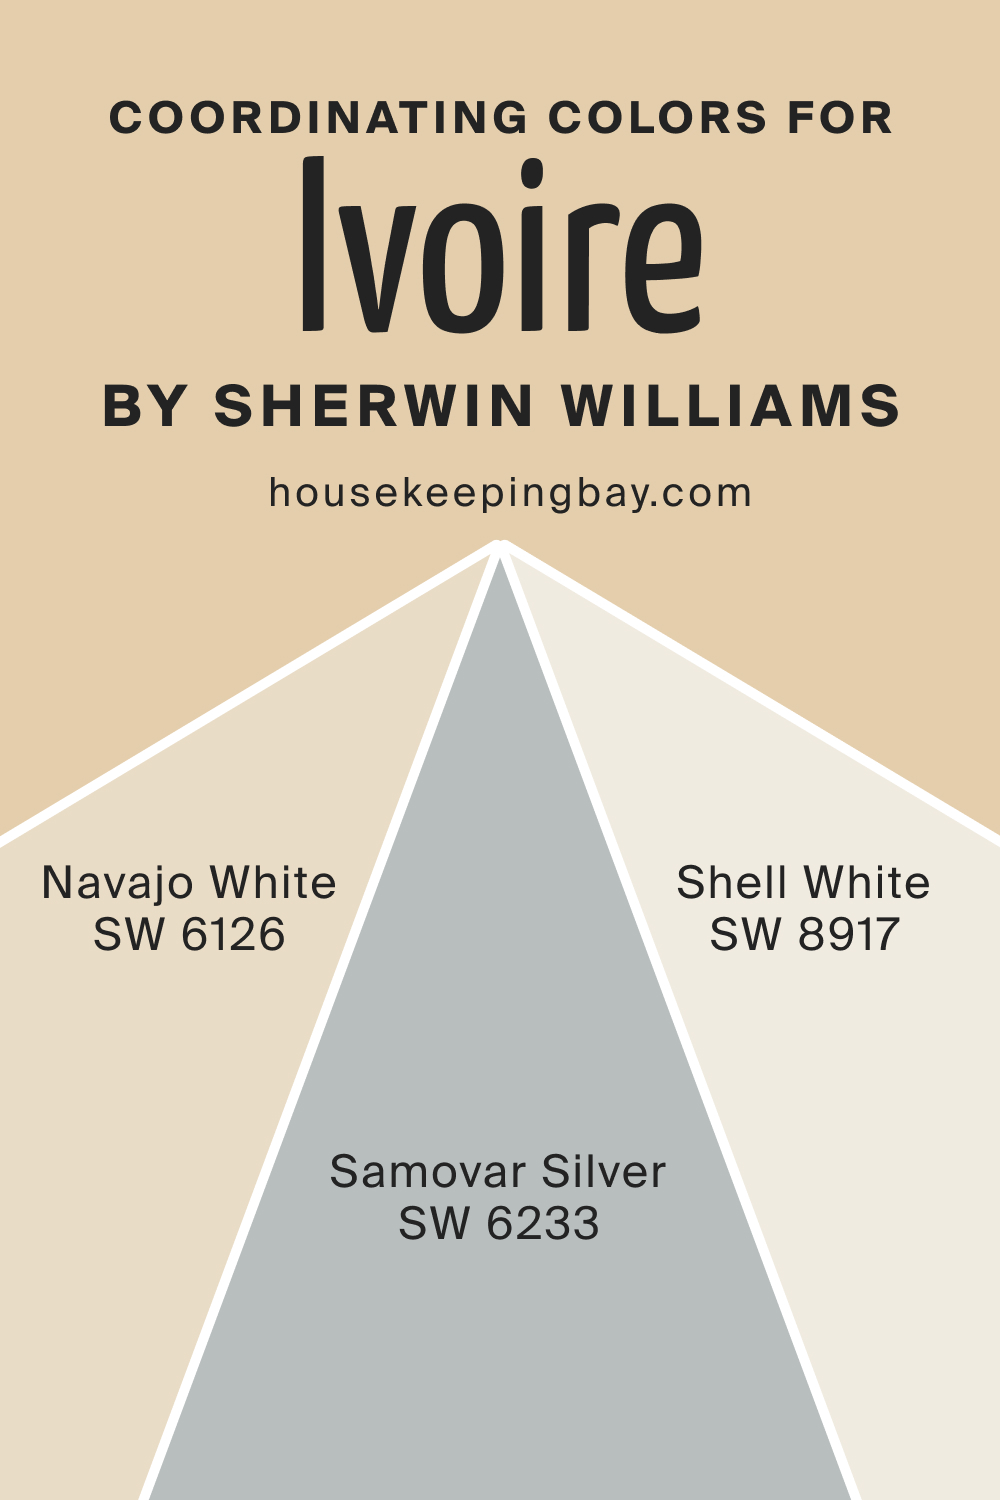 Coordinating Colors for SW Ivoire by Sherwin Williams